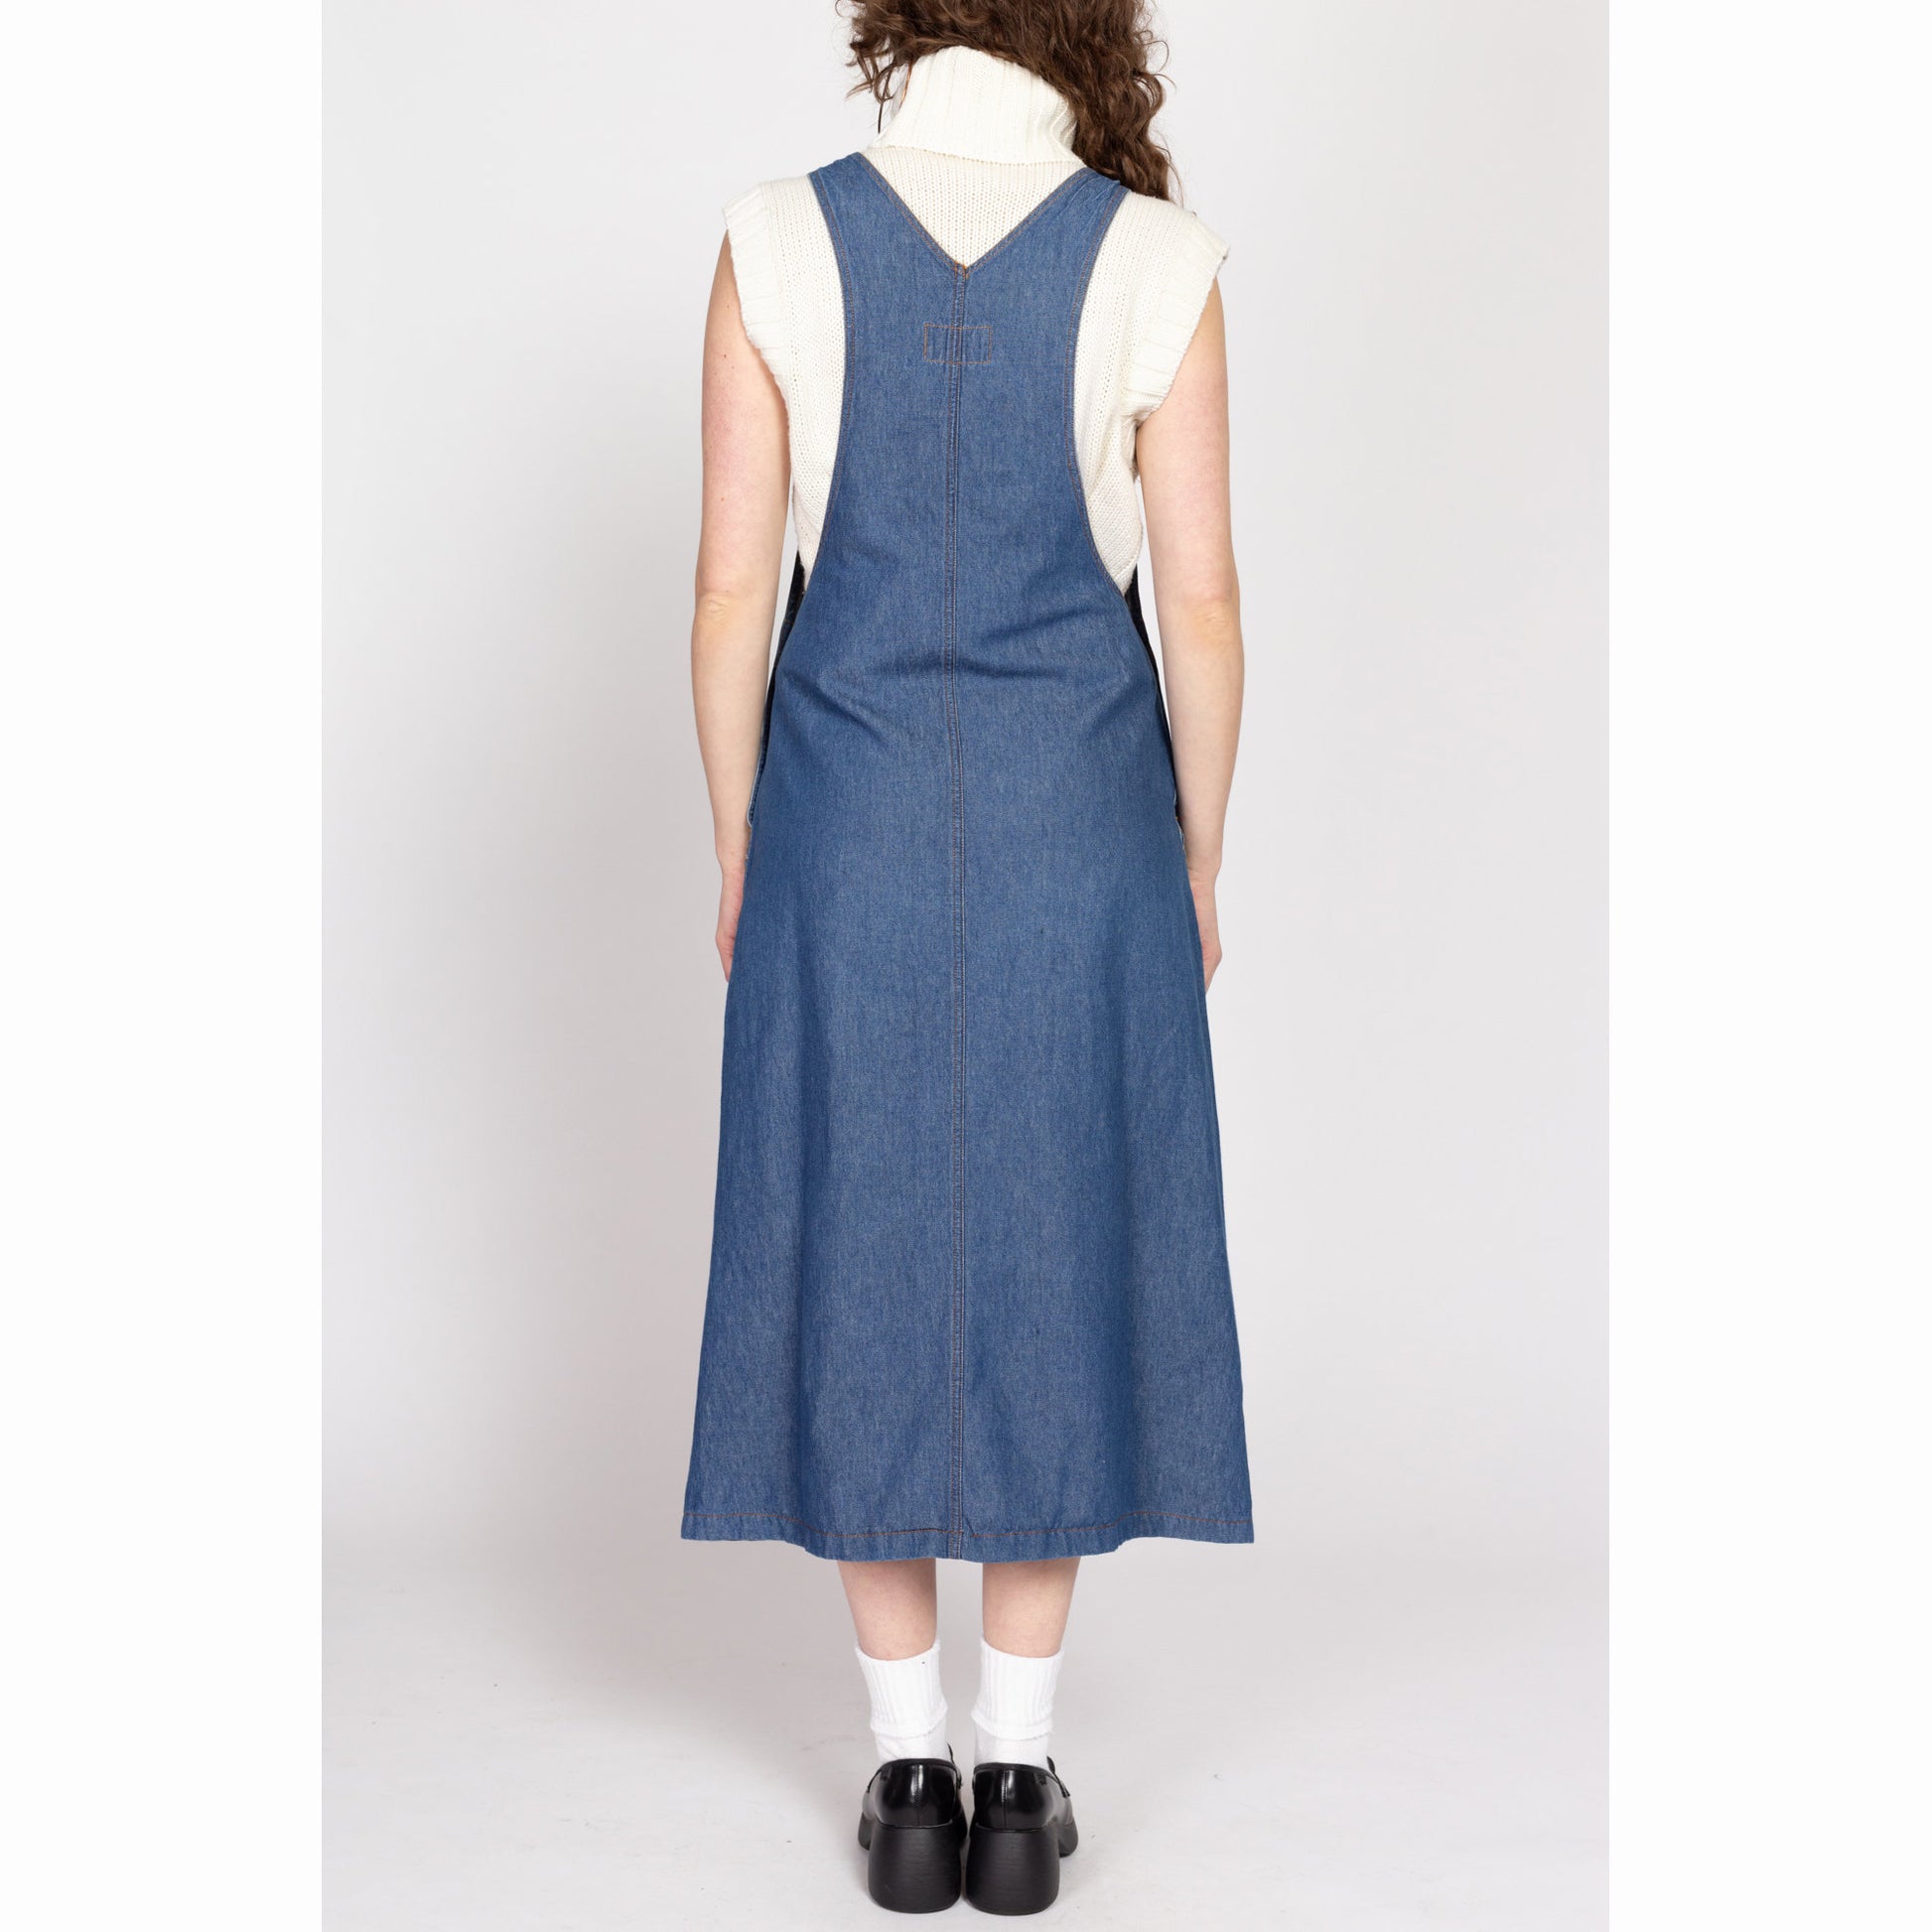 Small 80s Forenza Denim Pinafore Dress | Vintage Overall Blue Jean Grunge Maxi Dress